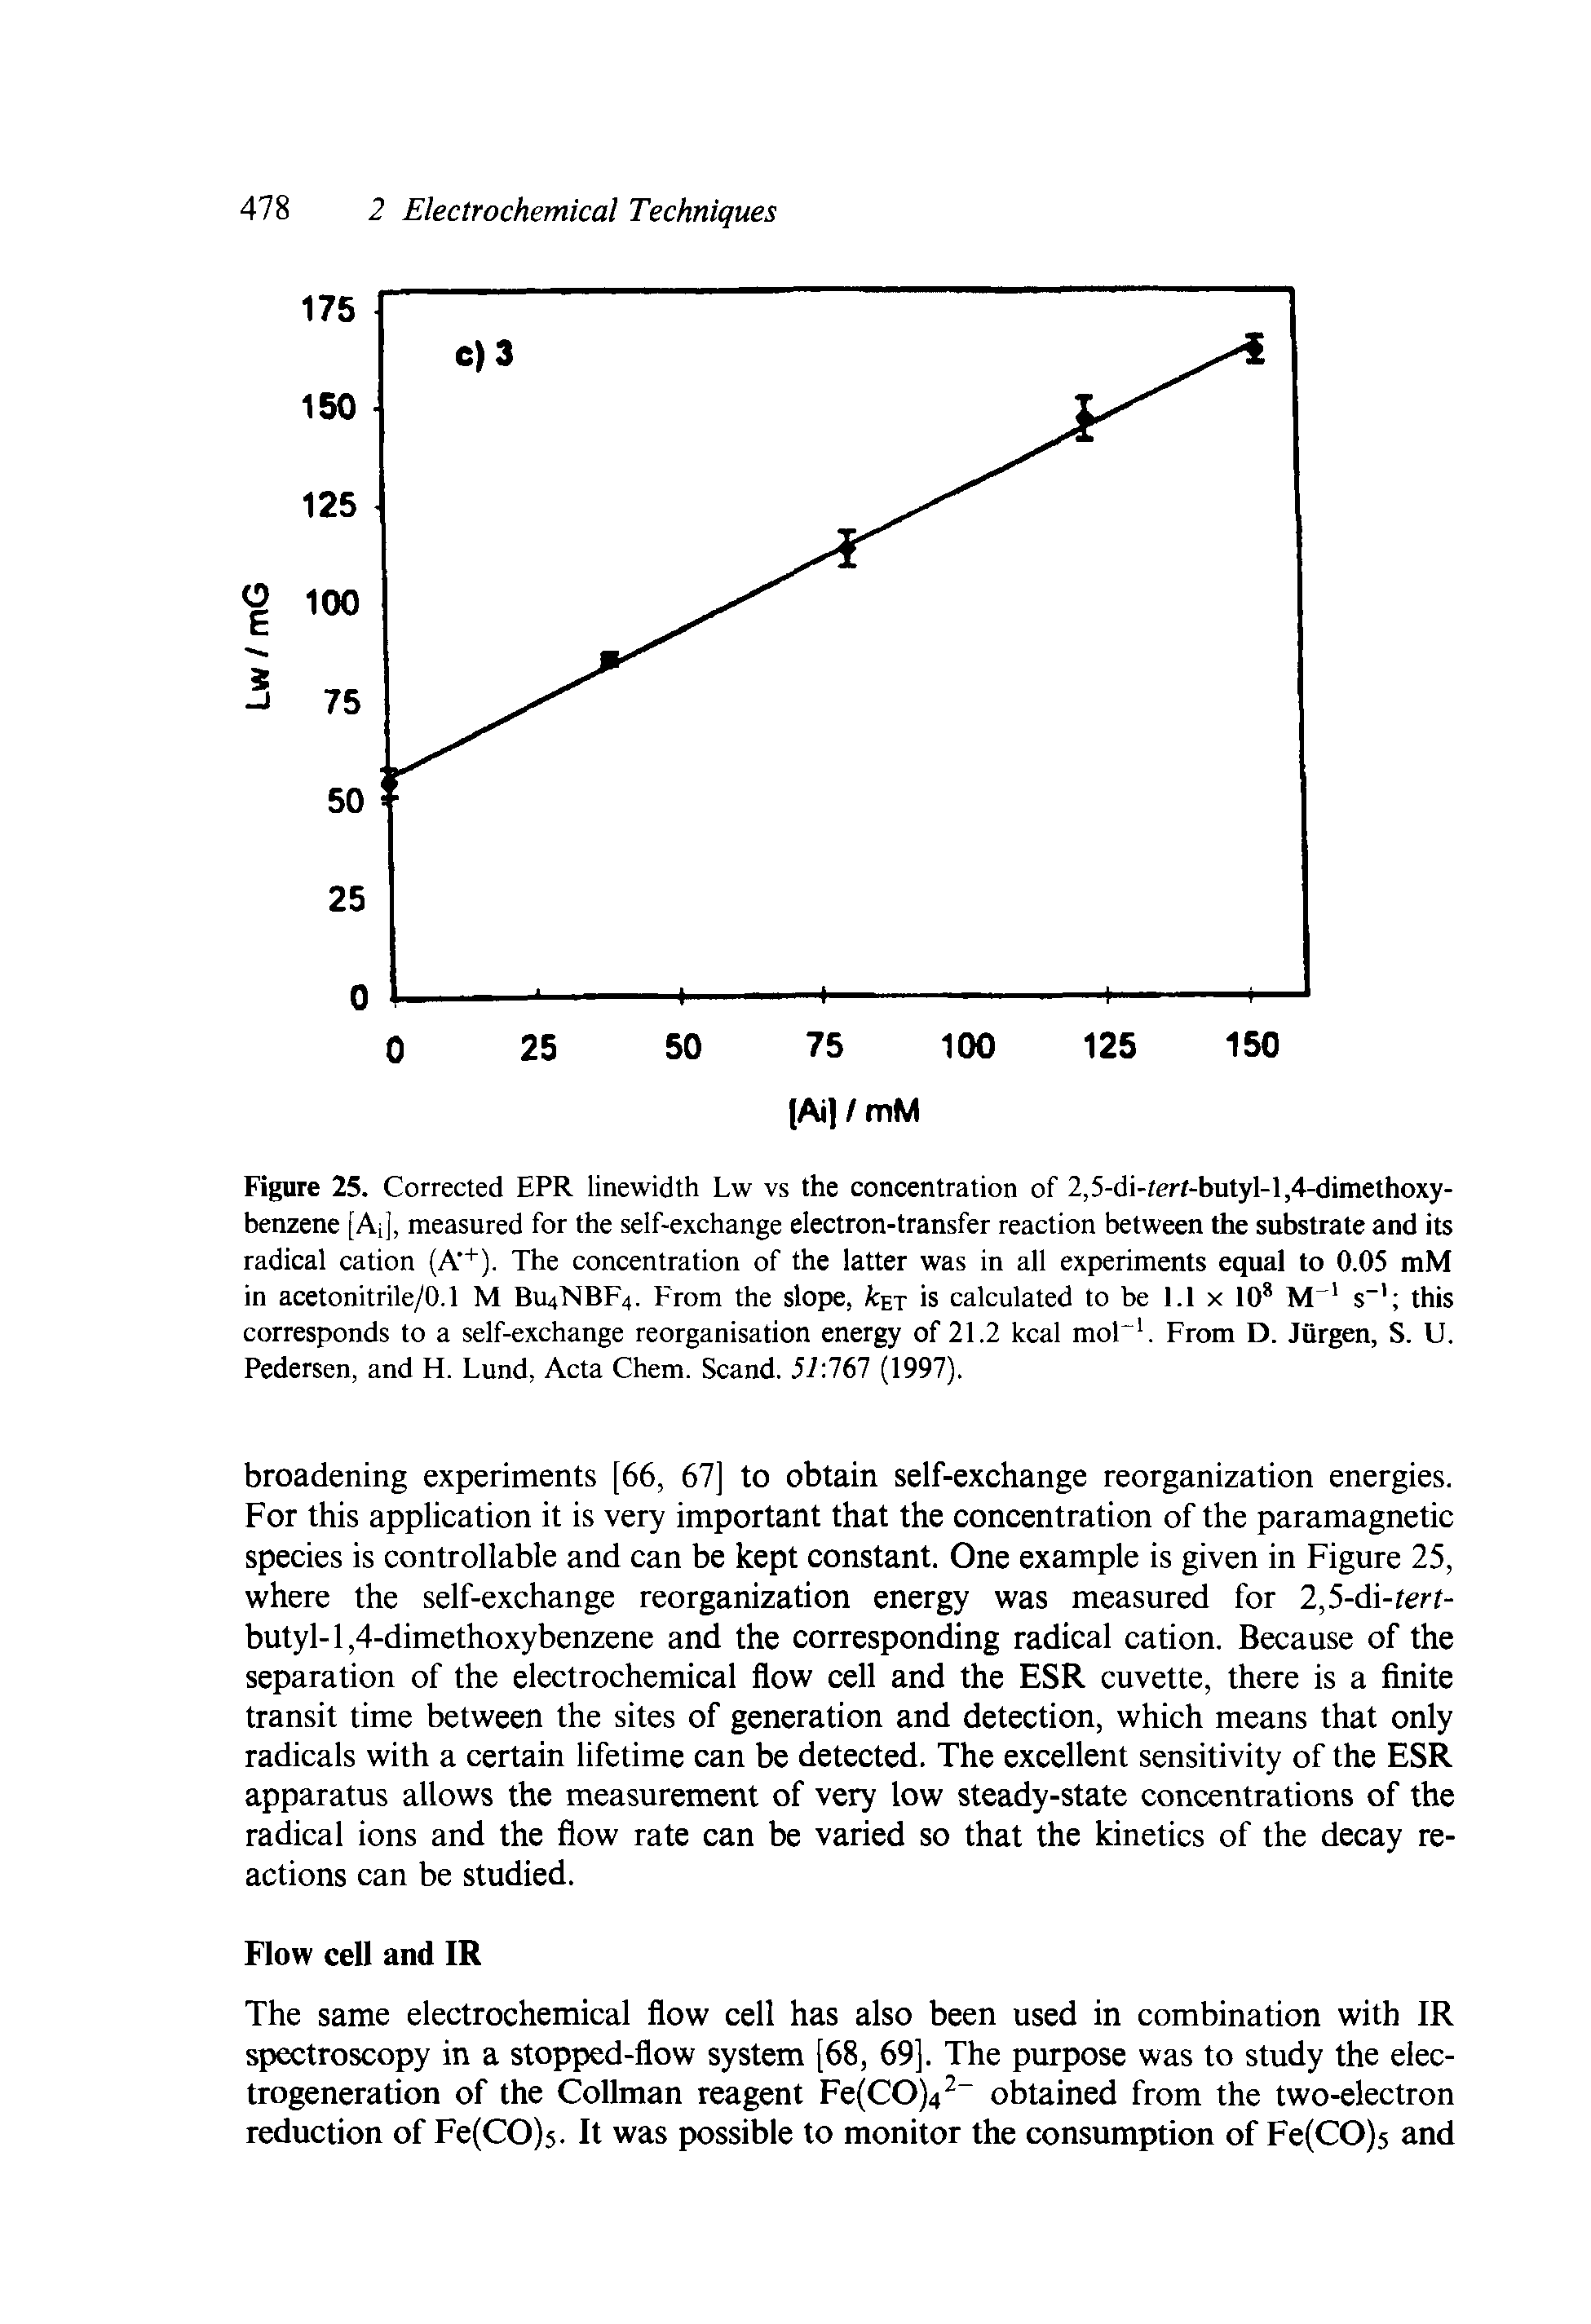 Figure 25. Corrected EPR linewidth Lw vs the concentration of 2,5-di-tert-butyl-l,4-dimethoxy-benzene [A ], measured for the self-exchange electron-transfer reaction between the substrate and its radical cation (A" ). The concentration of the latter was in all experiments equal to 0.05 mM in acetonitrile/0.1 M B114NBF4. From the slope, /cet is calculated to be 1.1 x 10 M s" this corresponds to a self-exchange reorganisation energy of 21.2 kcal moC. From D. Jurgen, S. U. Pedersen, and H. Fund, Acta Chem. Scand. 51 161 (1997).